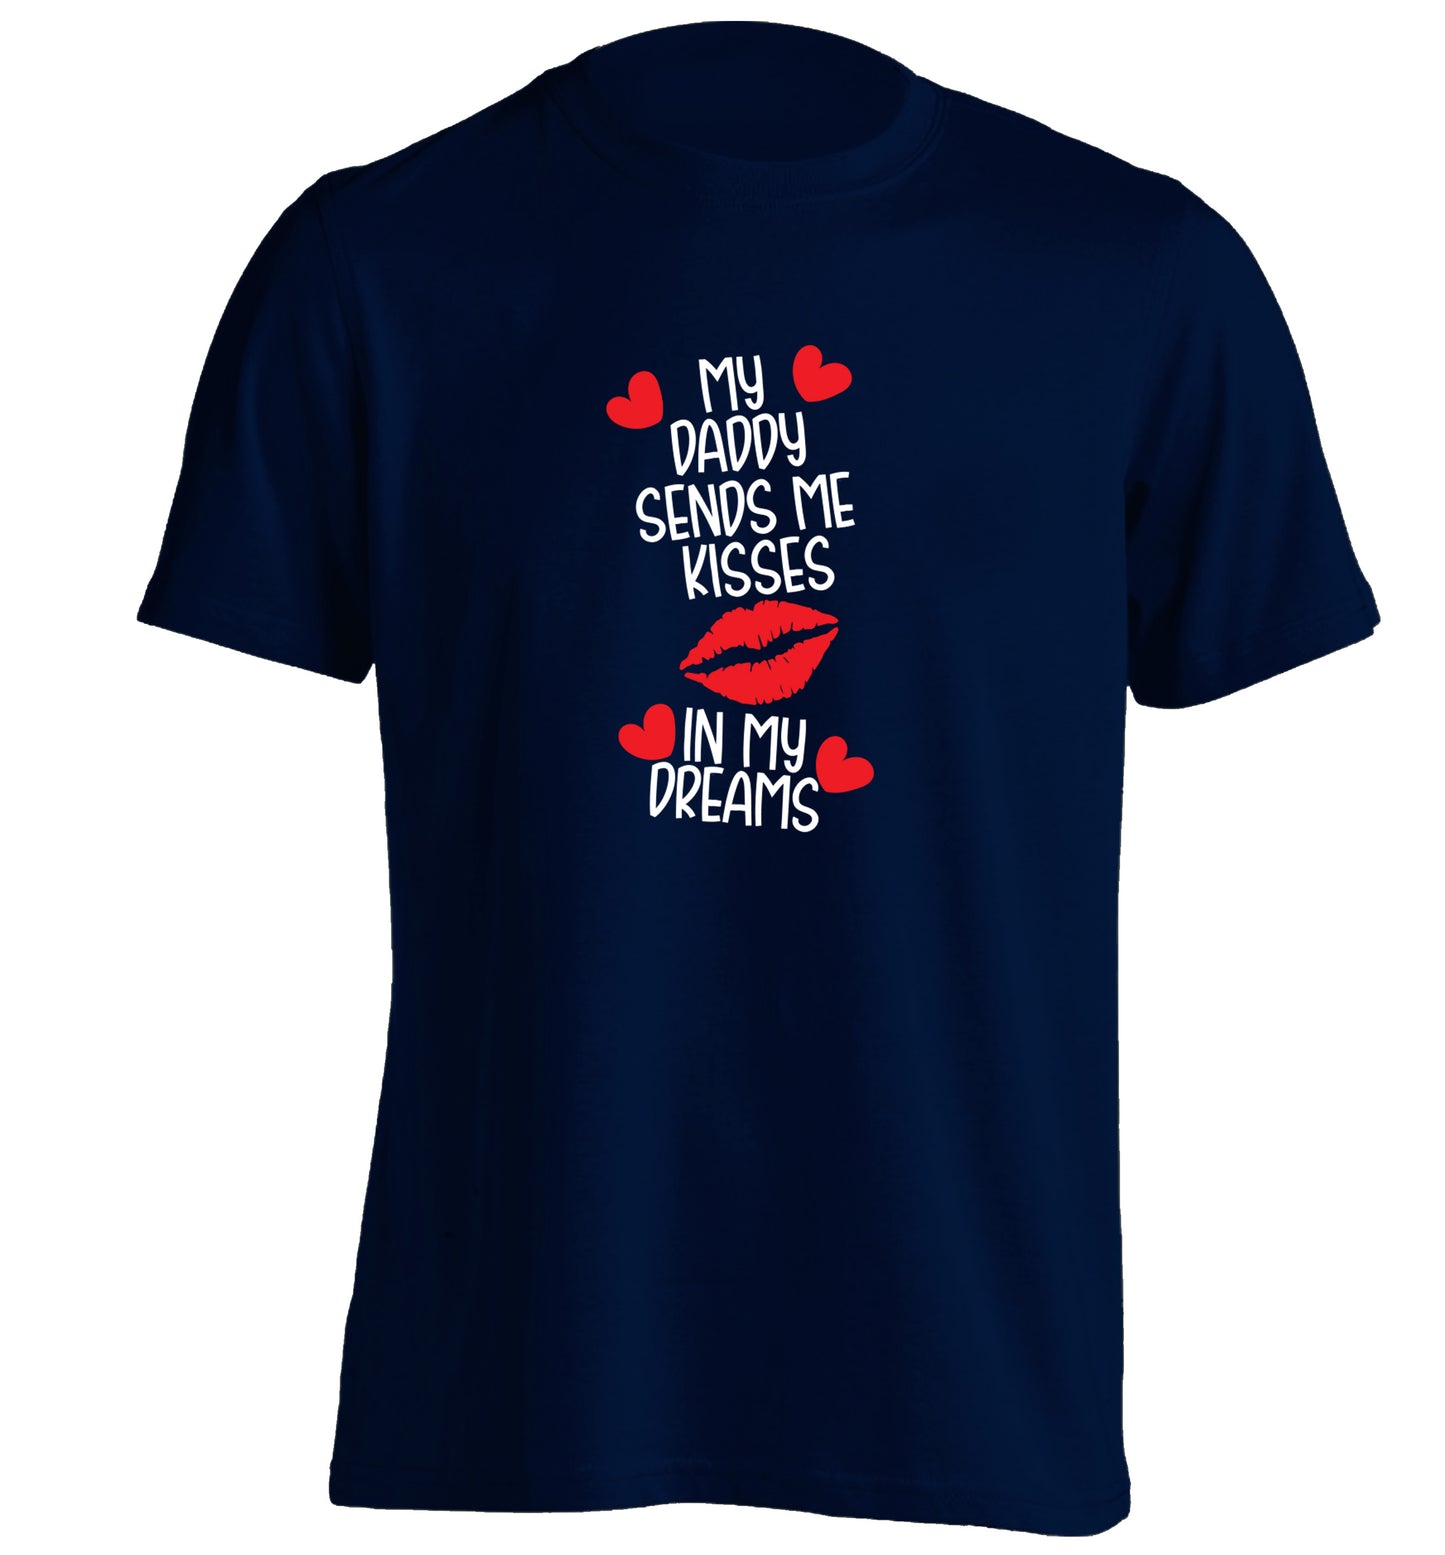 My daddy sends me kisses in my dreams adults unisex navy Tshirt 2XL